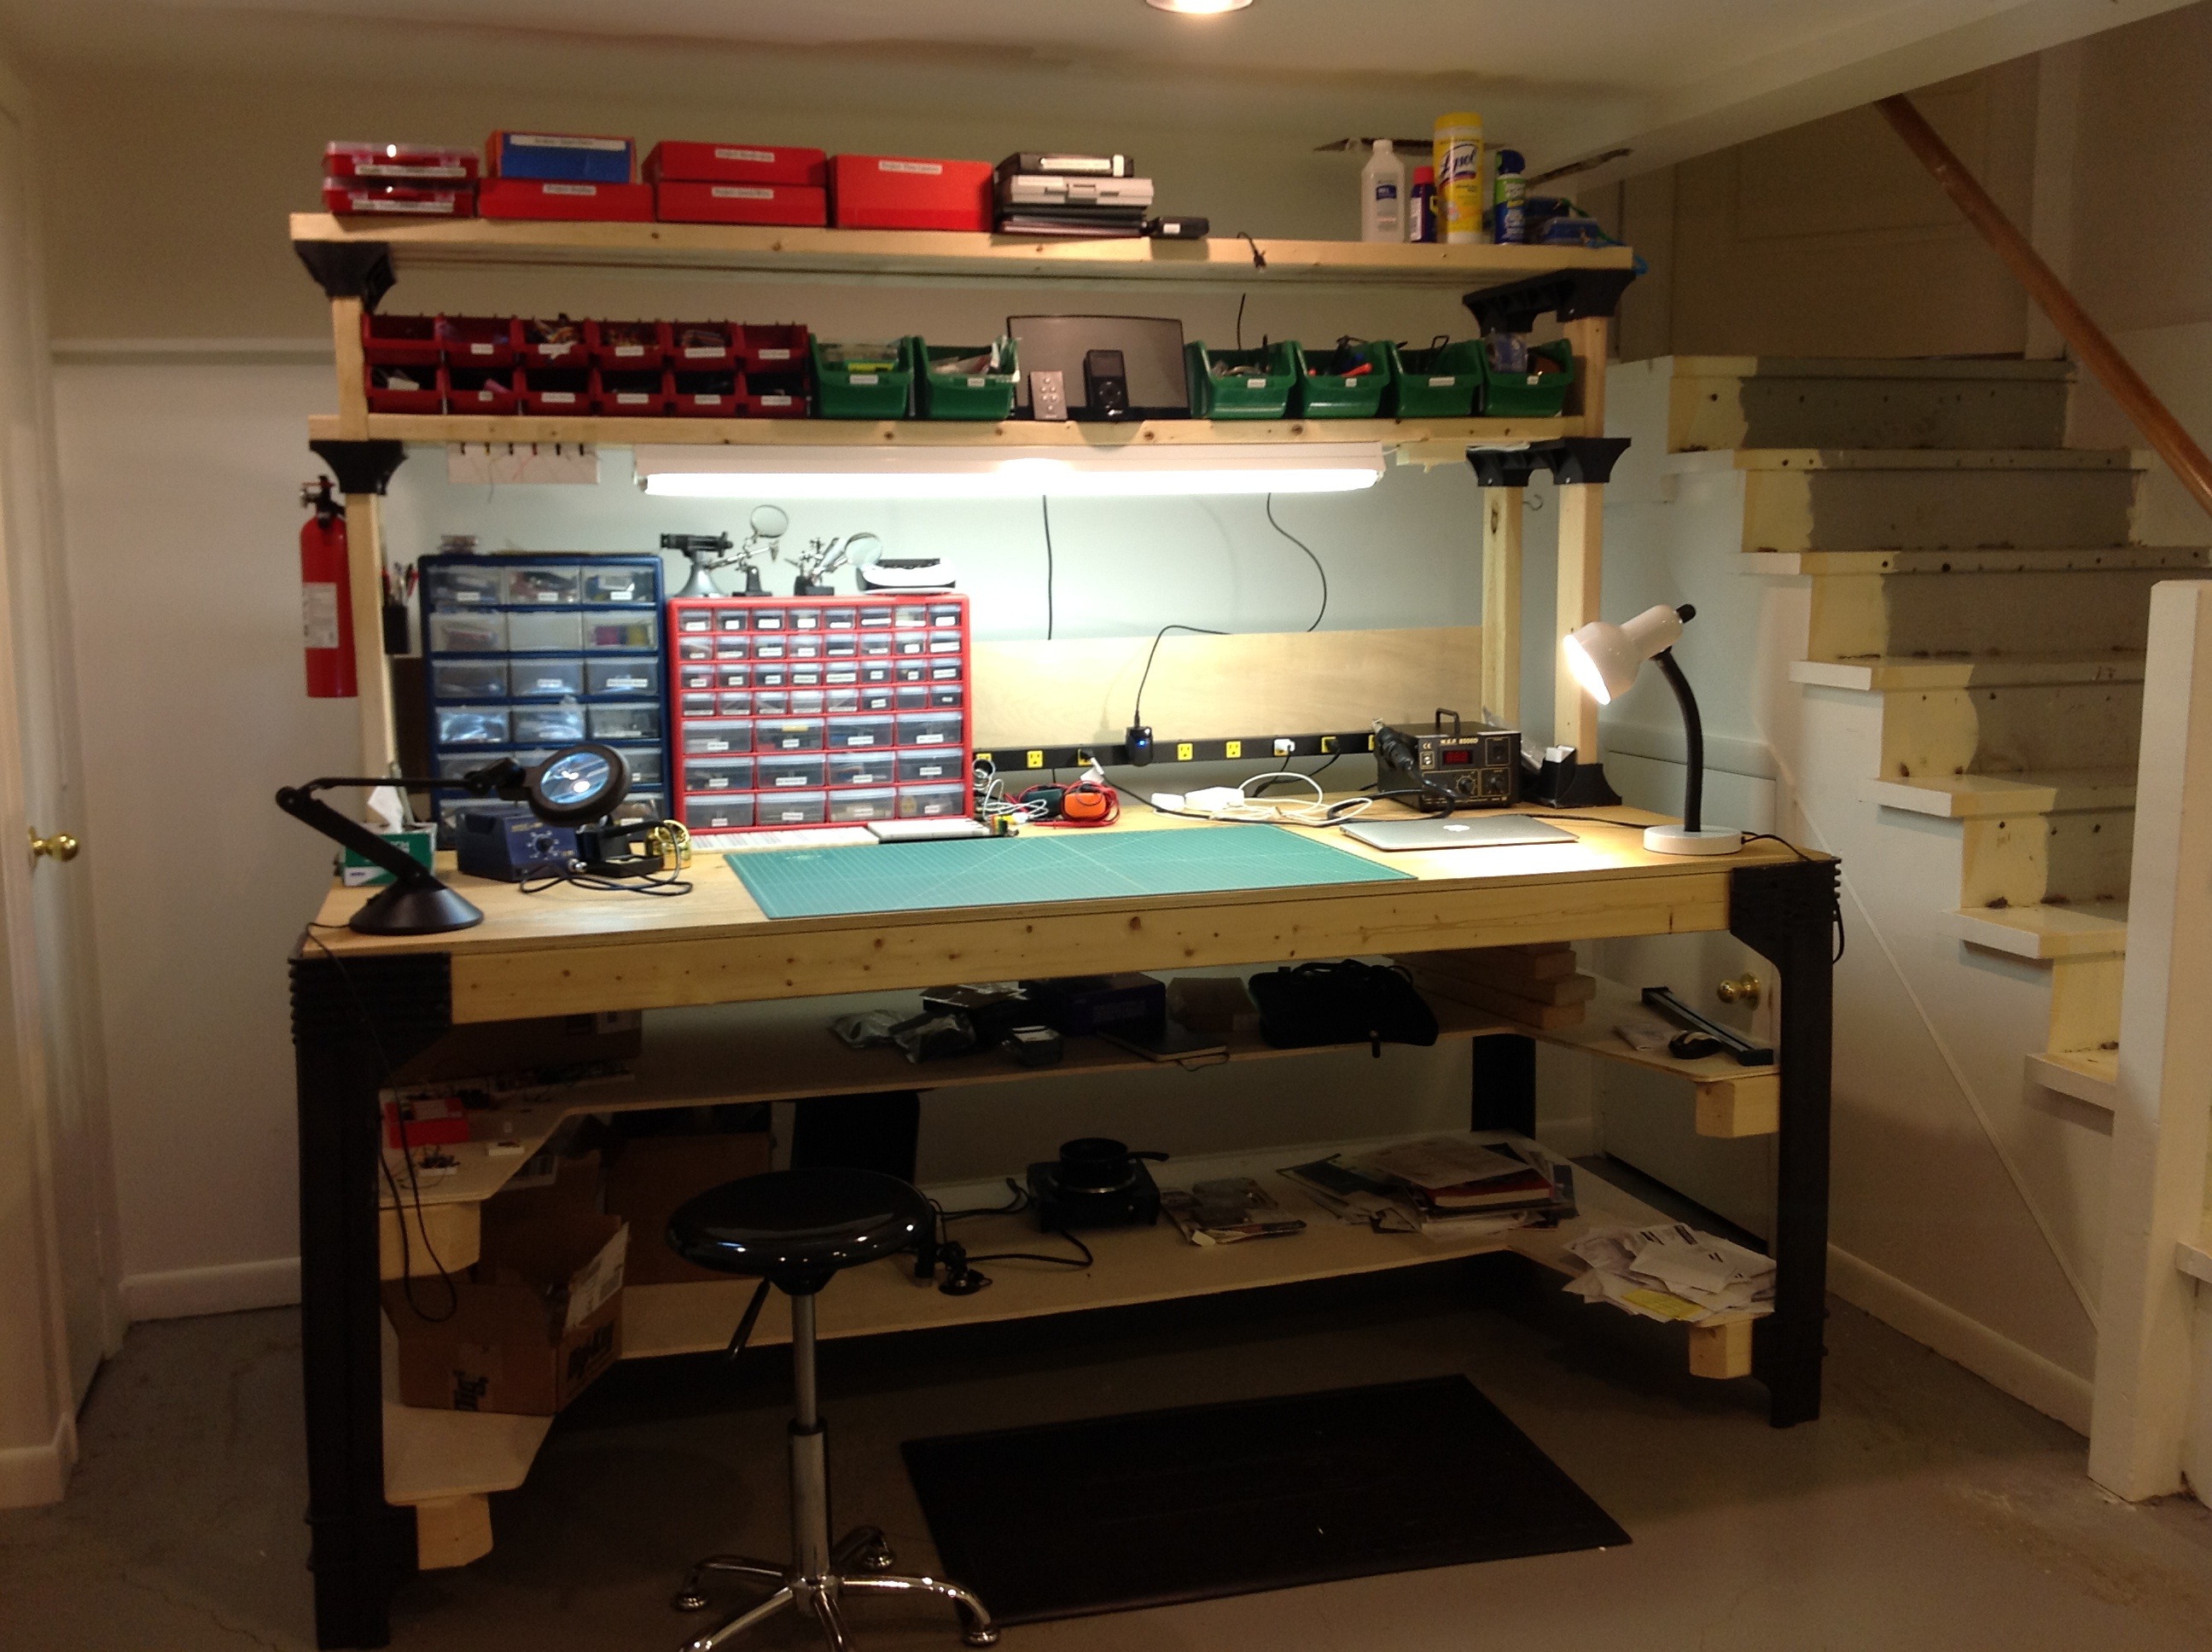  workbench in the basement and tips I’ve learned along the way